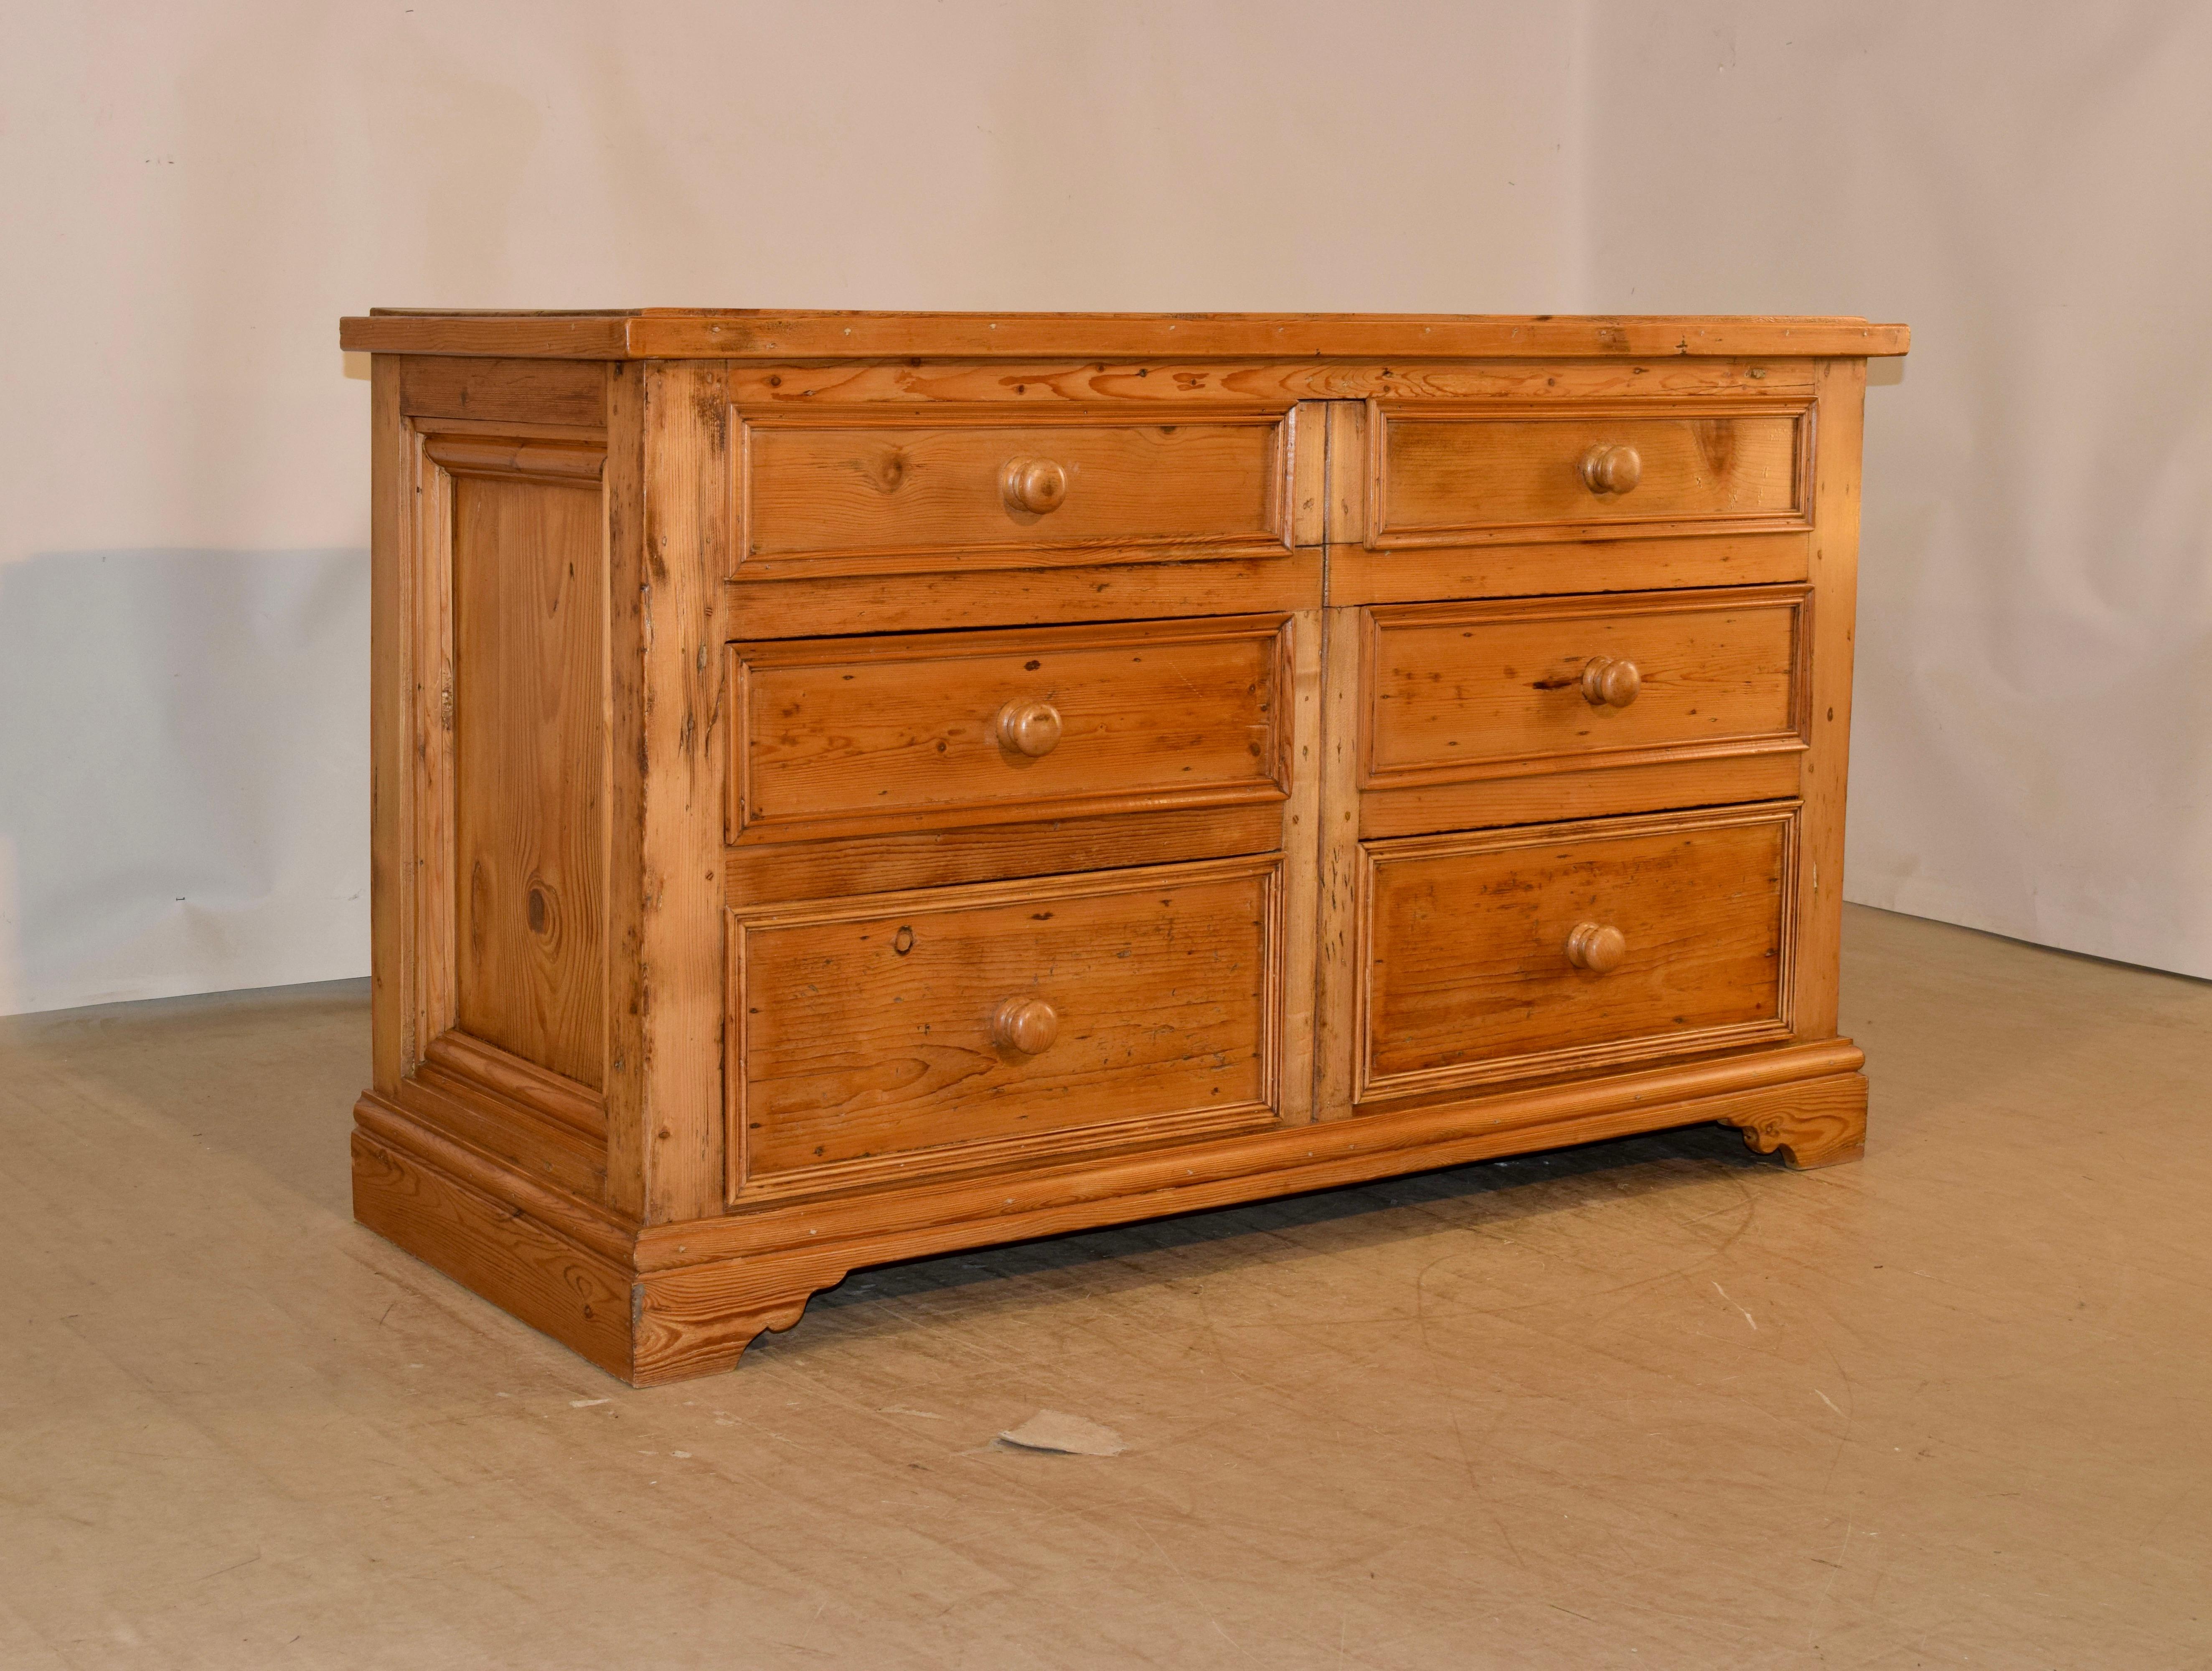 19th century English wide chest of drawers made from pine. the top has a molded edge, following down to hand paneled sides and six drawers in the front. The drawers are paneled as well, and the case is raised on bracket feet in the front and a